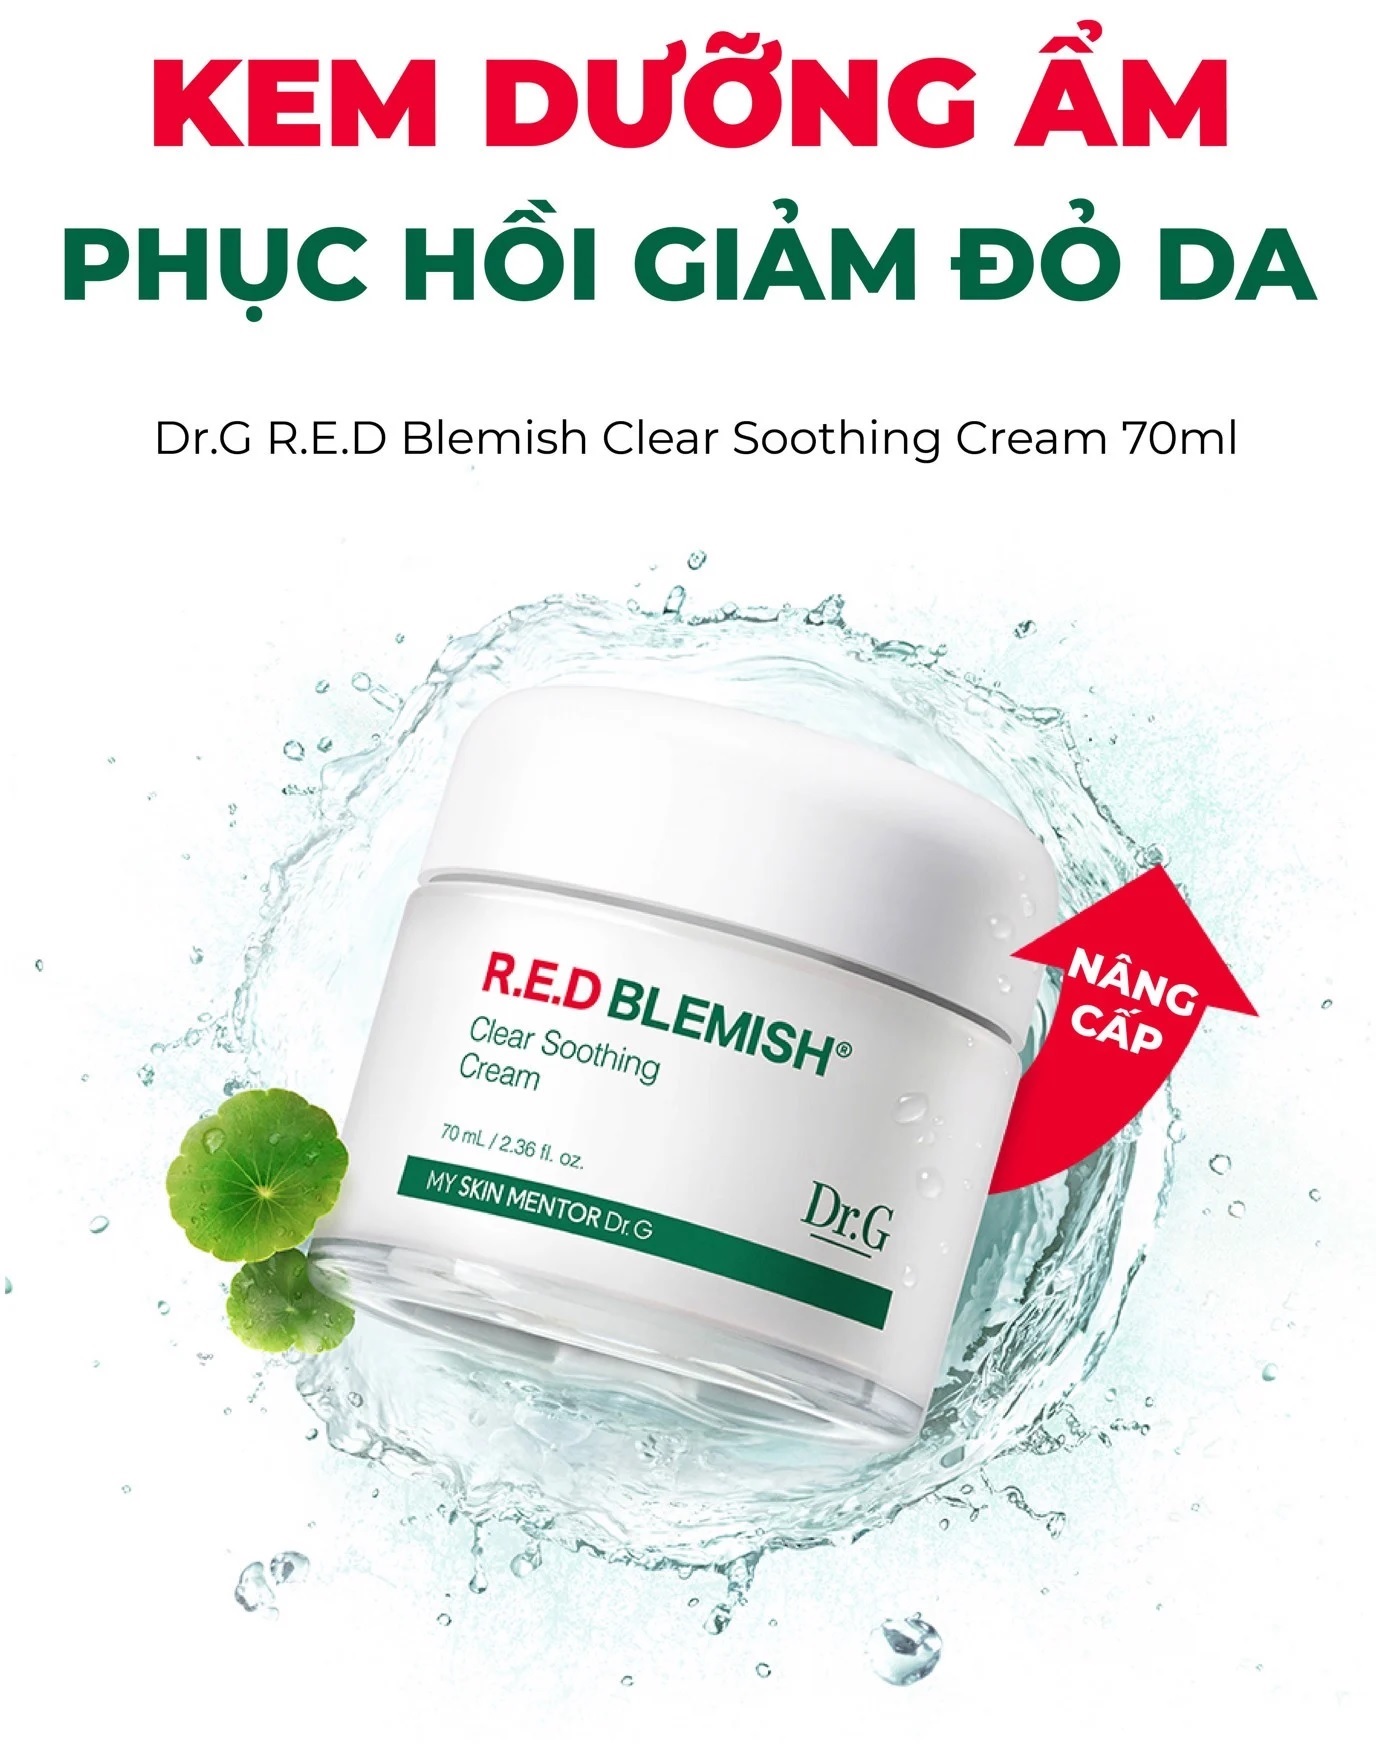 /kem-duong-dr-g-r-e-d-blemish-clear-soothing-cream